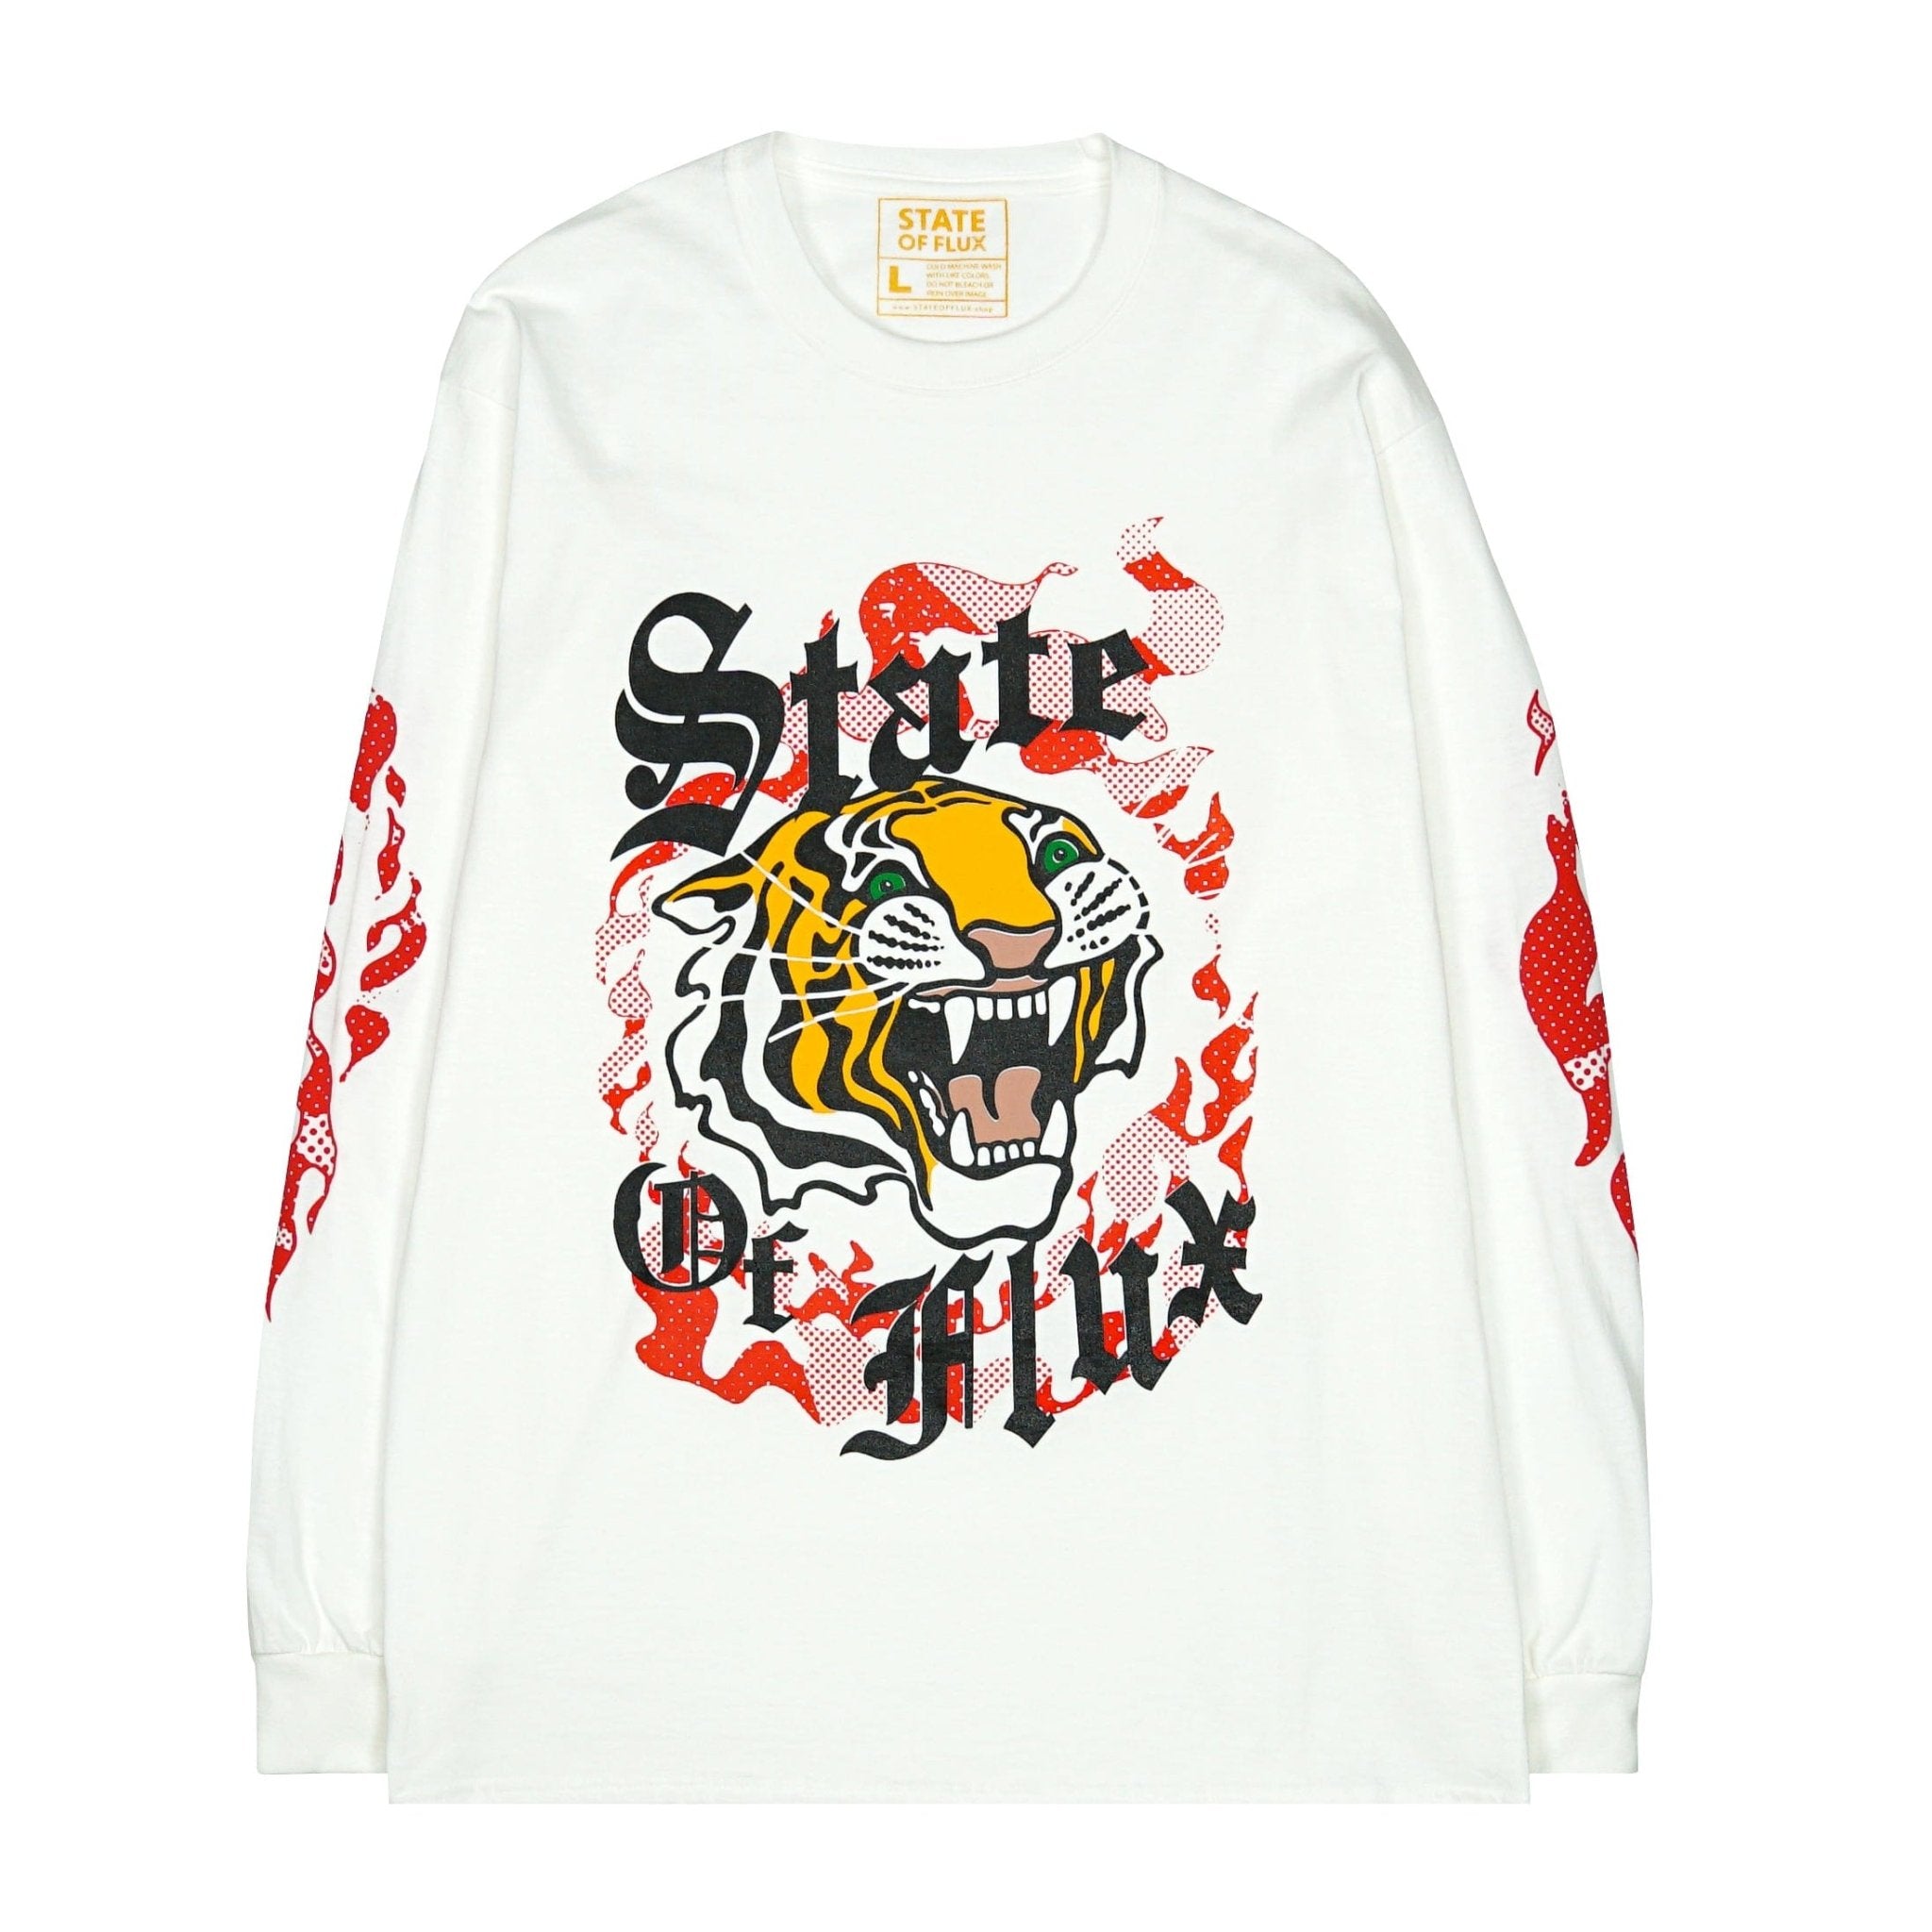 Flaming Tiger Long-sleeve Tee in white